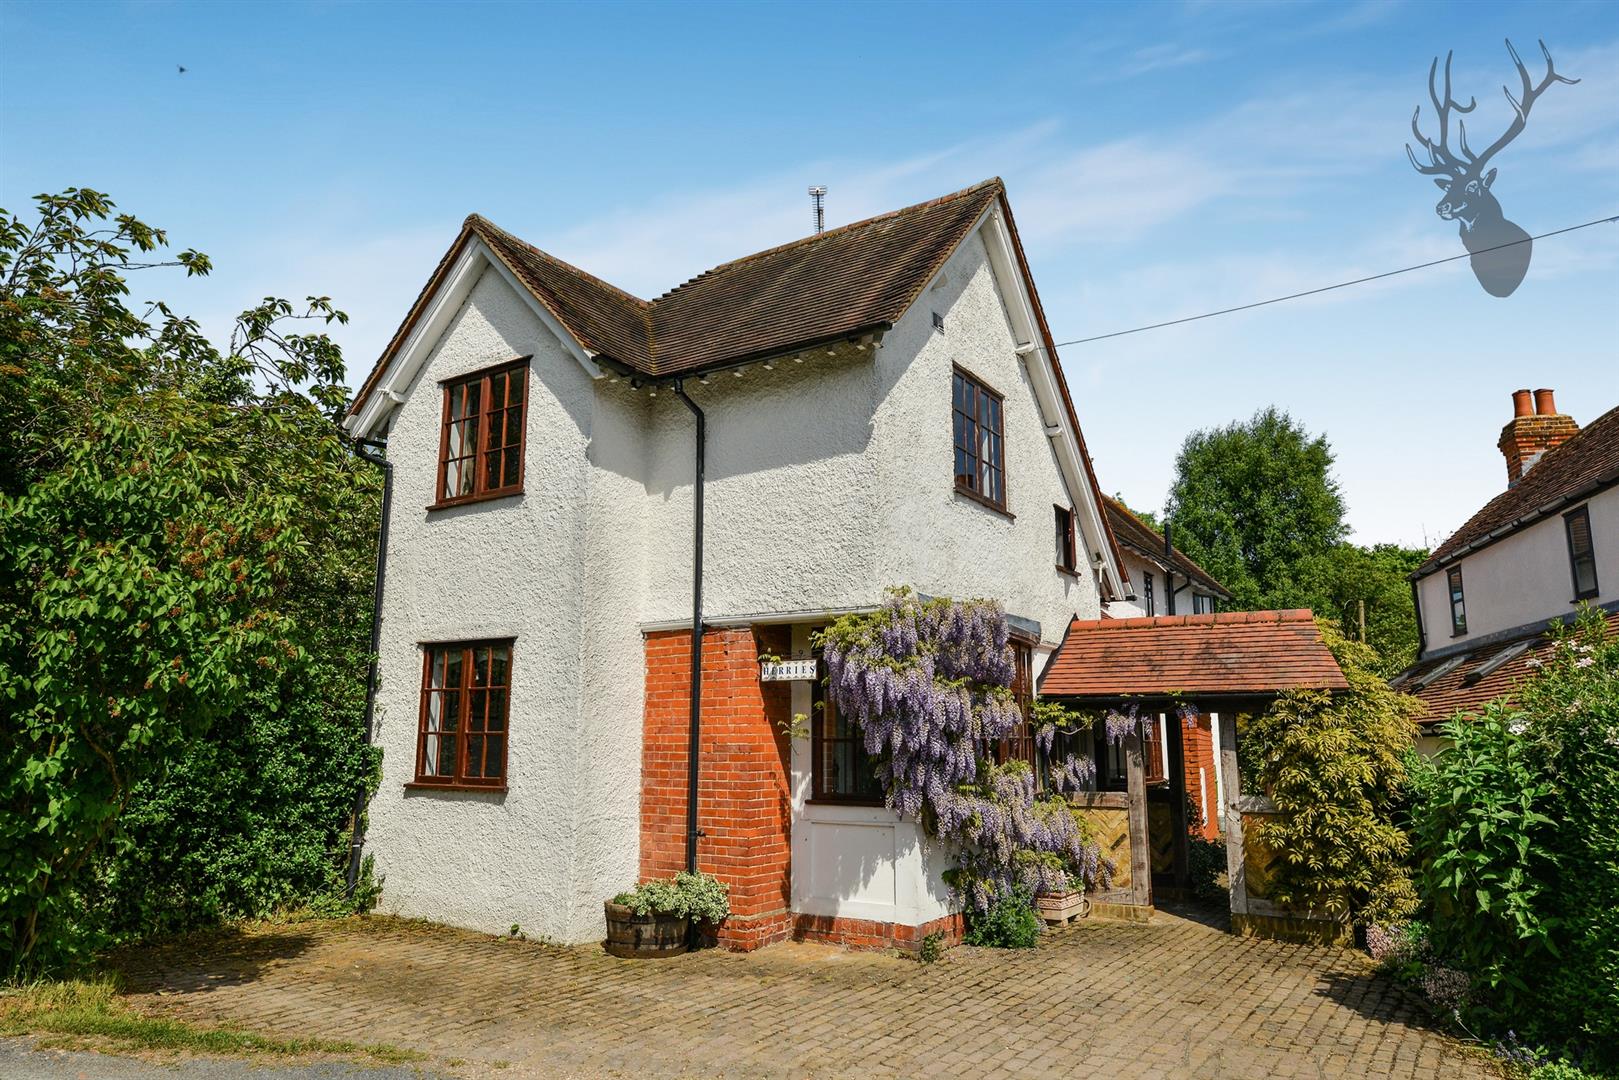 Similar Property: House - Detached in Ongar